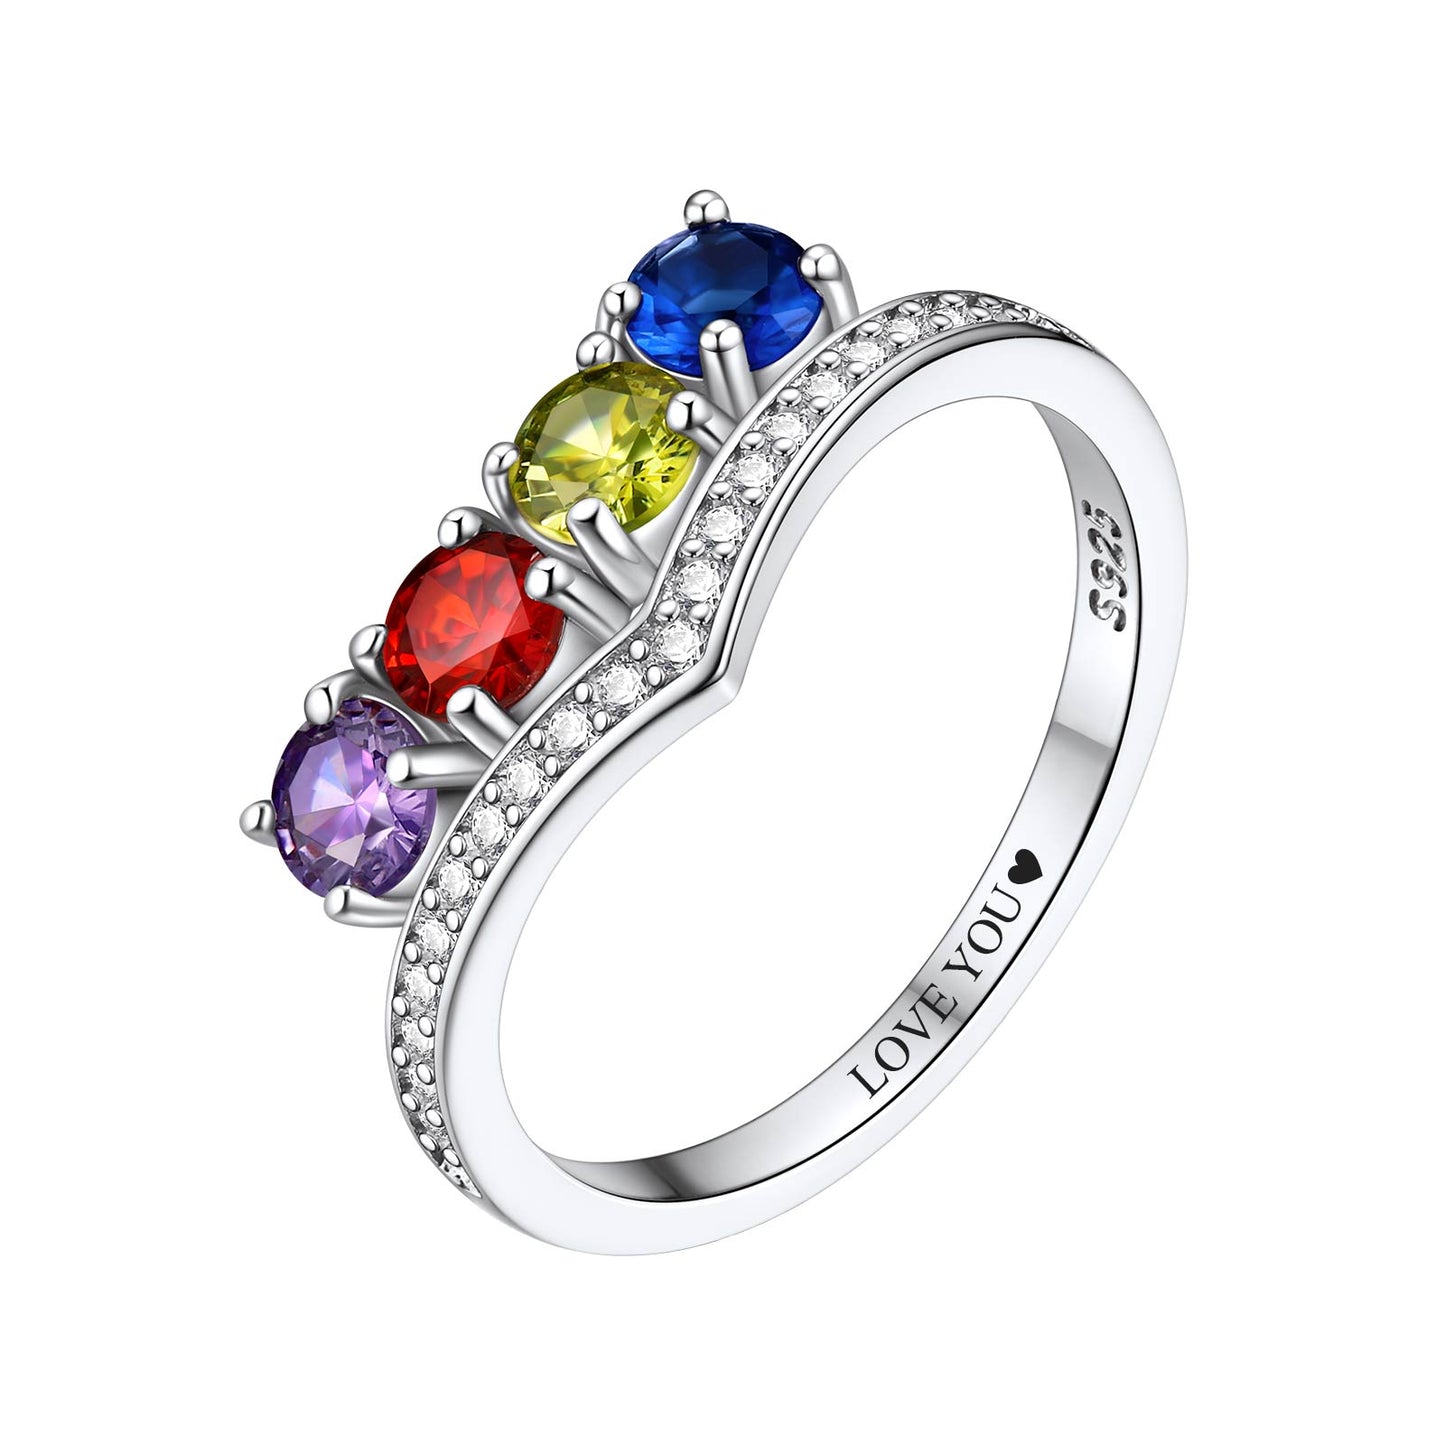 Personalized Family Birthstone Ring